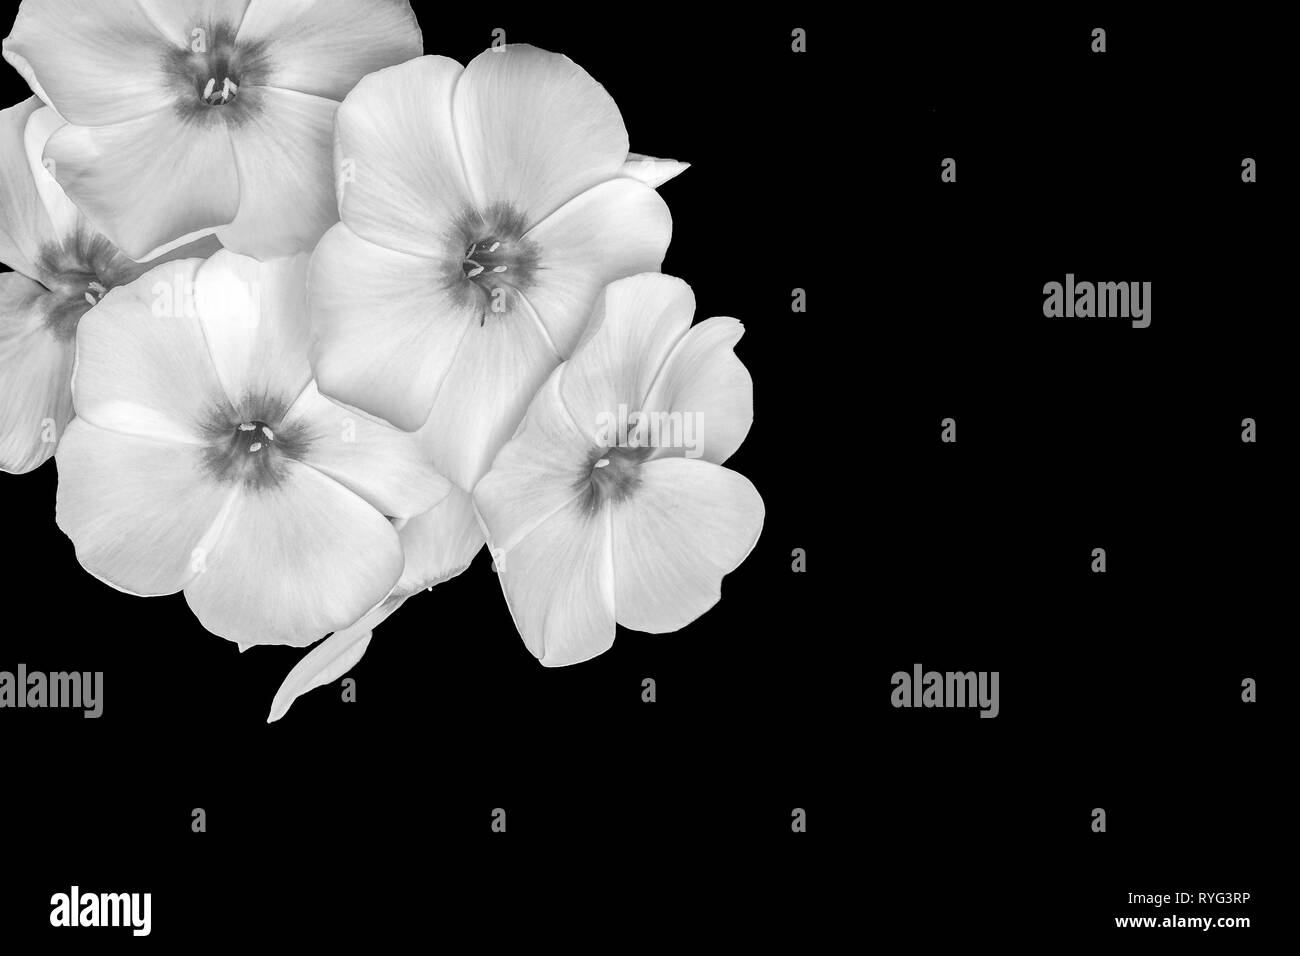 Fine art still life detailed floral monochrome macro photography of a single isolated stem of white phlox blossoms on black background in vintage Stock Photo